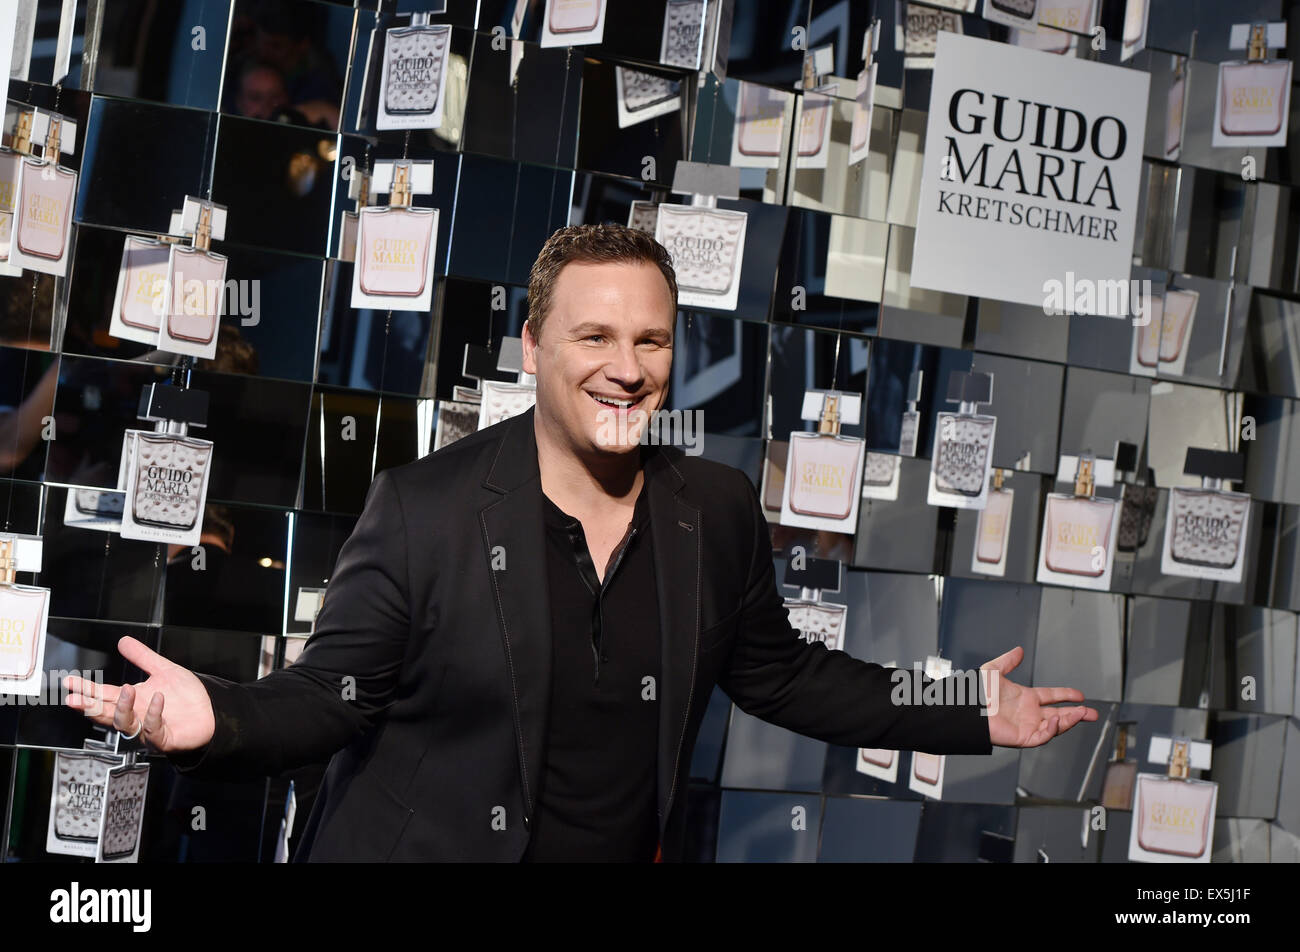 Berlin, Germany. 07th July, 2015. Designer Guido Maria Kretschmer poses during the presentation of the fragrance 'Guido Maria Kretschmer' that he created together with LR Health & Beauty in the Marriott Hotel in Berlin, Germany, 07 July 2015. Photo: JENS KALAENE/dpa/Alamy Live News Stock Photo